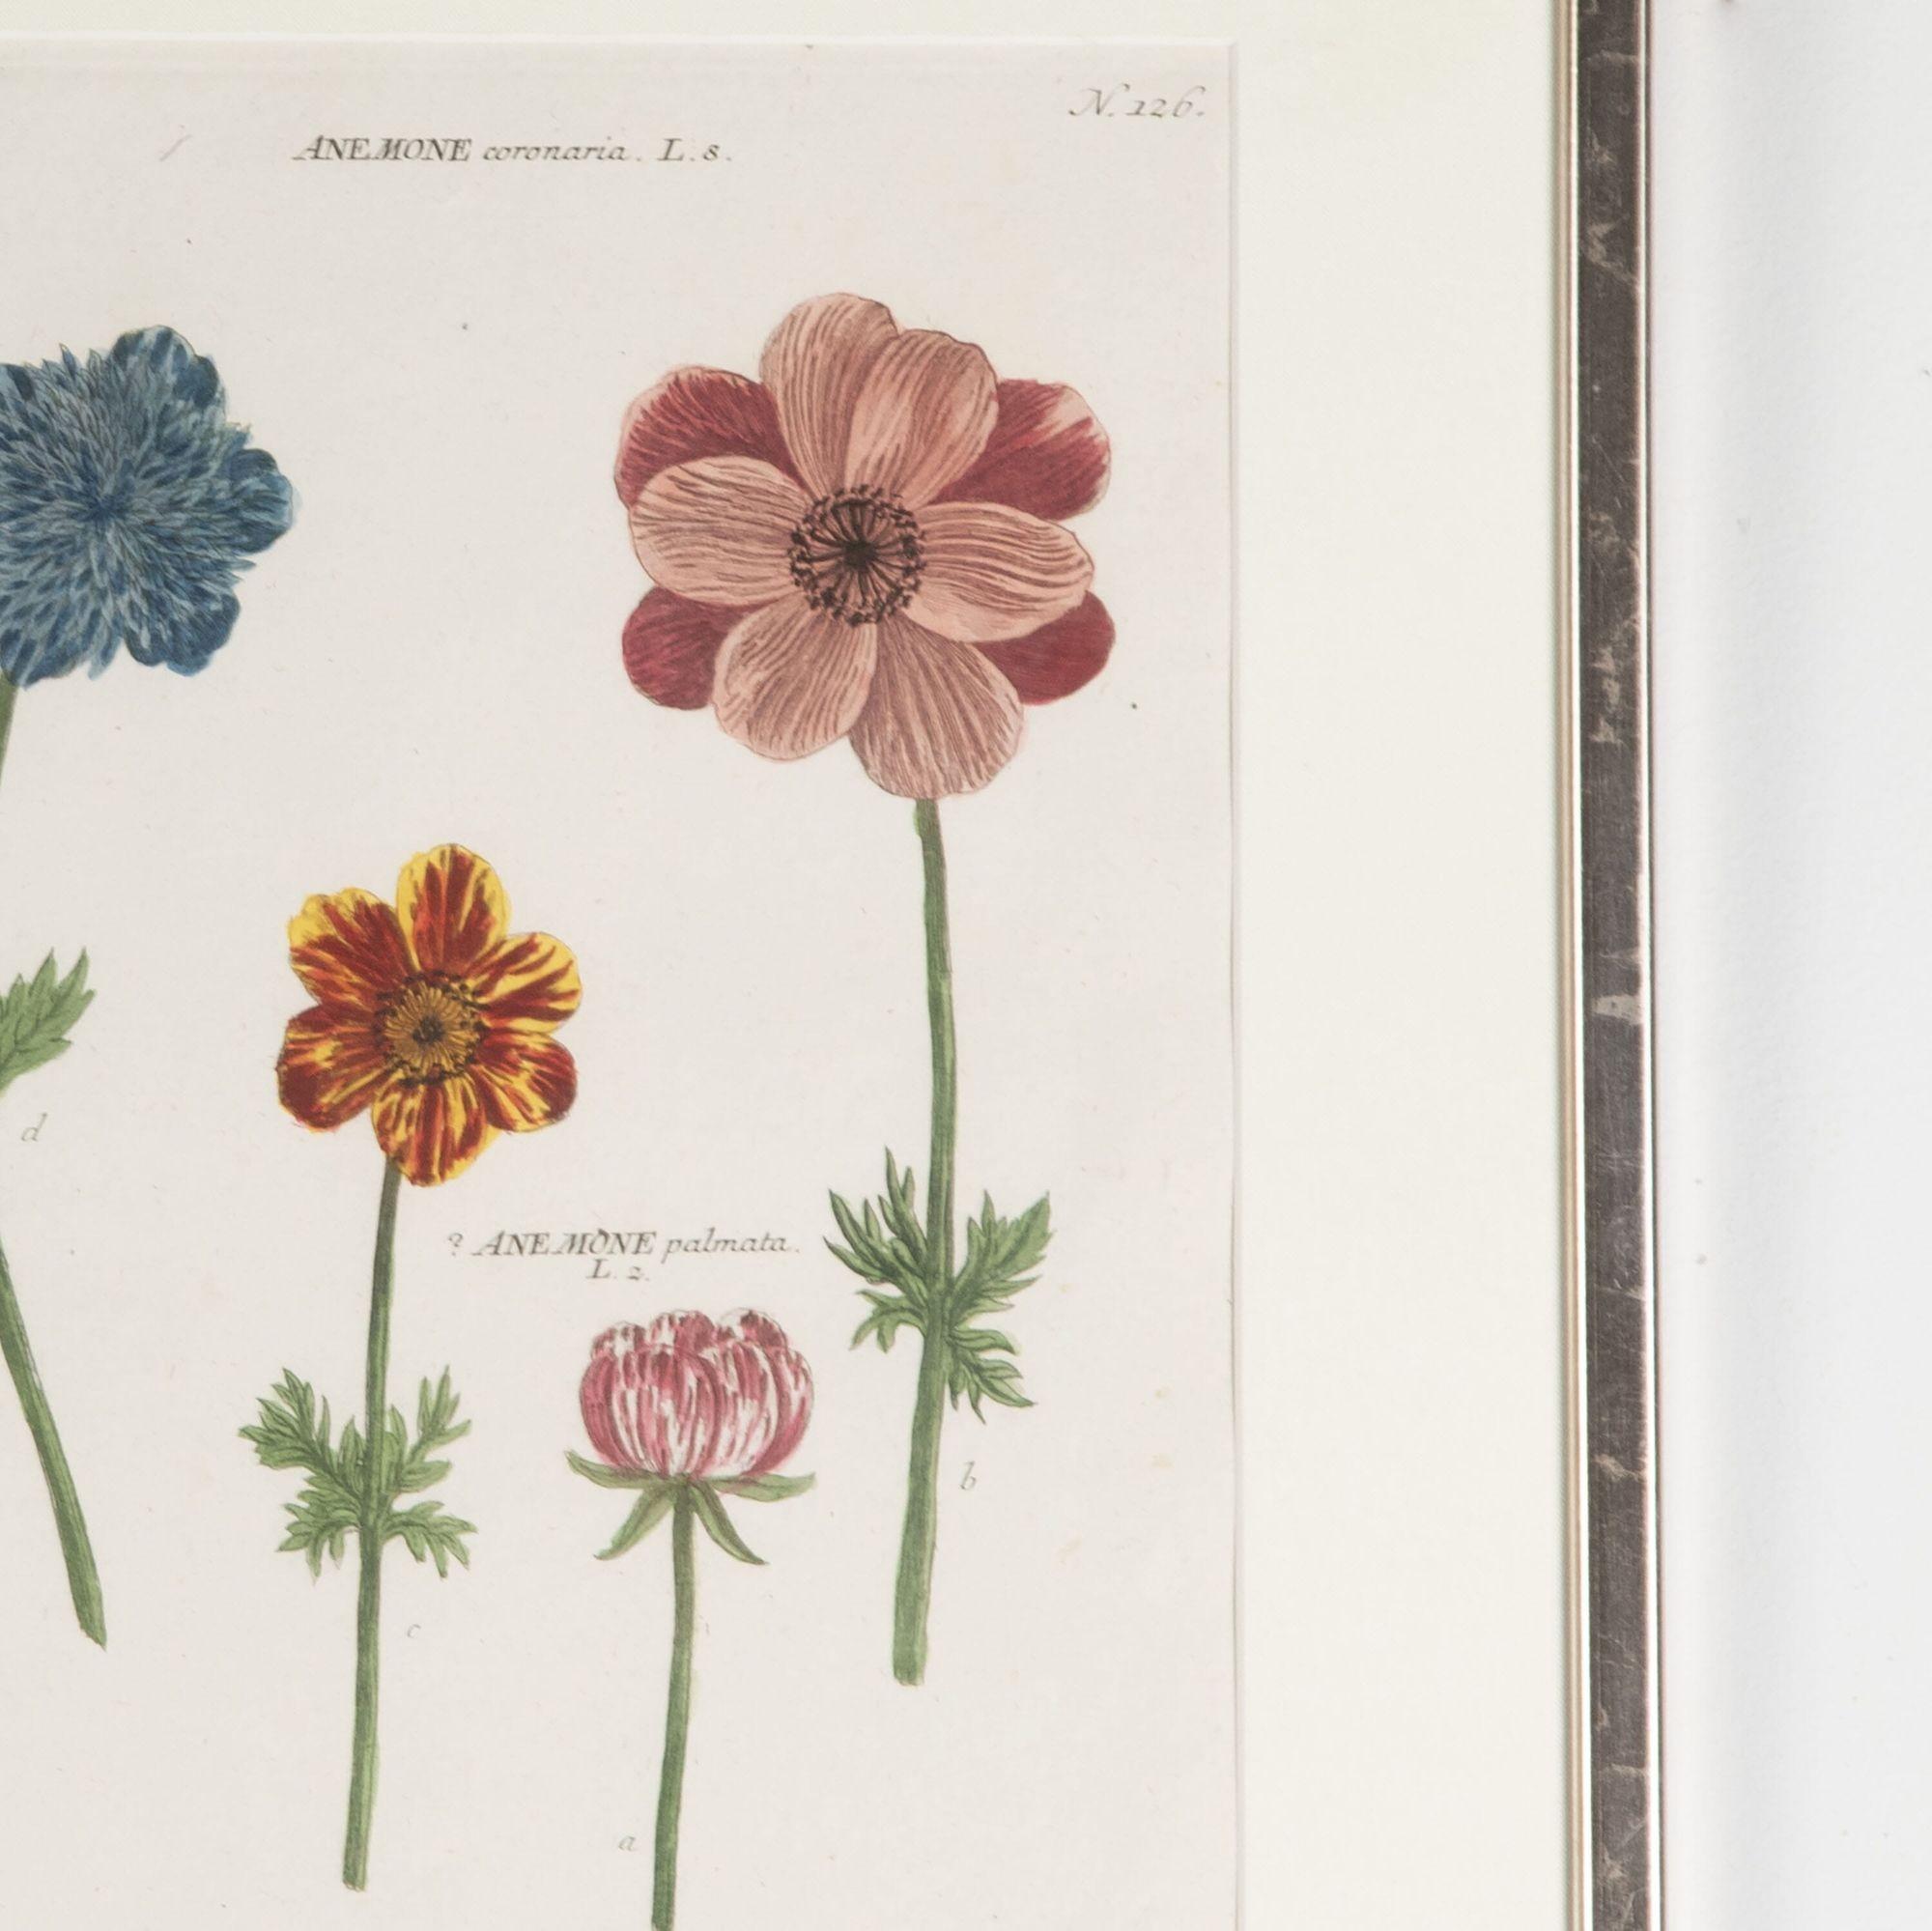 Set of six original 18th century hand coloured botanical prints of anemones by Johann Weinmann.
Presented in bespoke silvered frames with hessian mounts and Ar70 art glass for optimal clarity.
Weinmann's work is beautifully recorded and includes